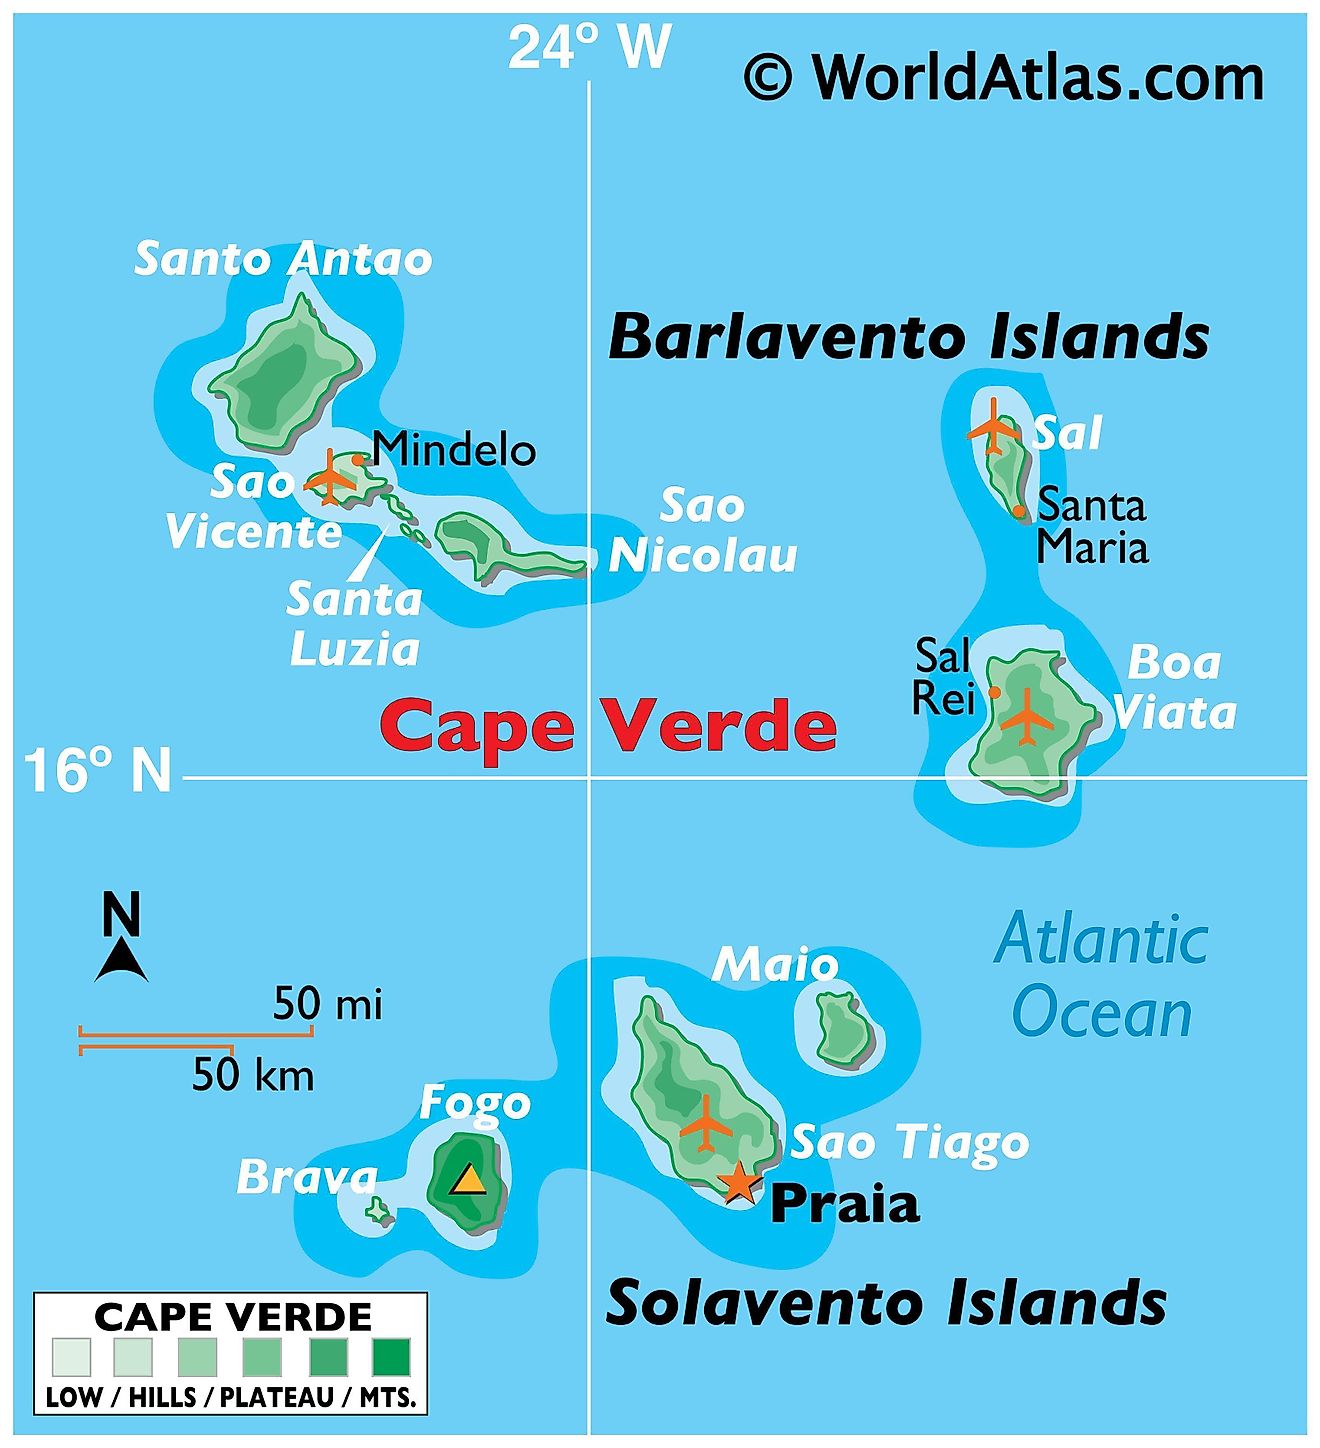 Physical Map of Cape Verde showing major islands, highest point, terrain, major settlements, and more.